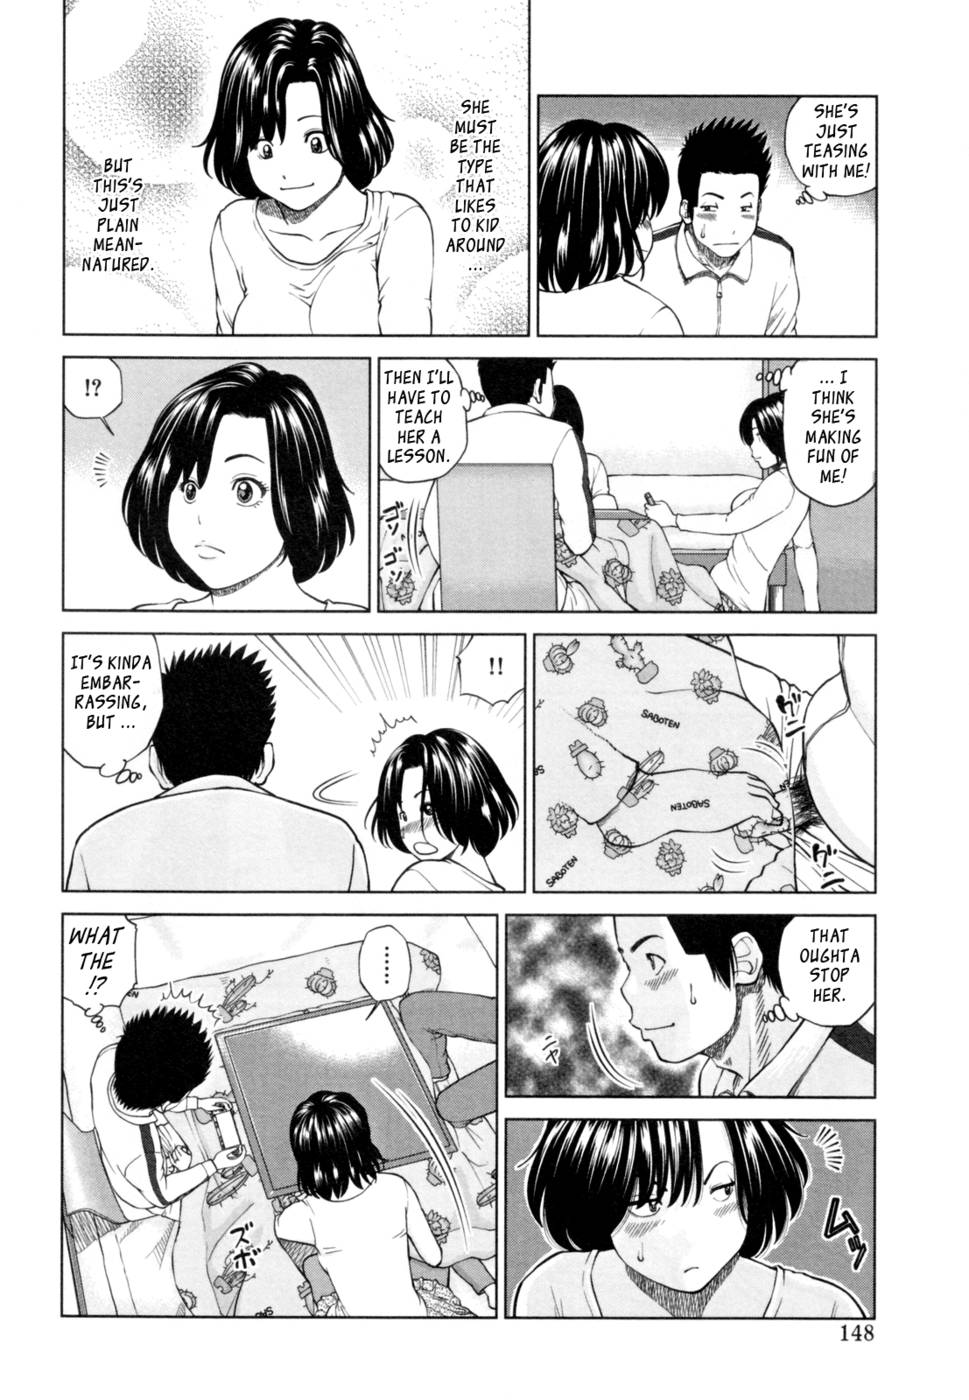 32 Year Old Unsatisfied Wife-Chapter 8-Seduced By My Friends Mom-Hentai Manga Hentai Comic - Page 6